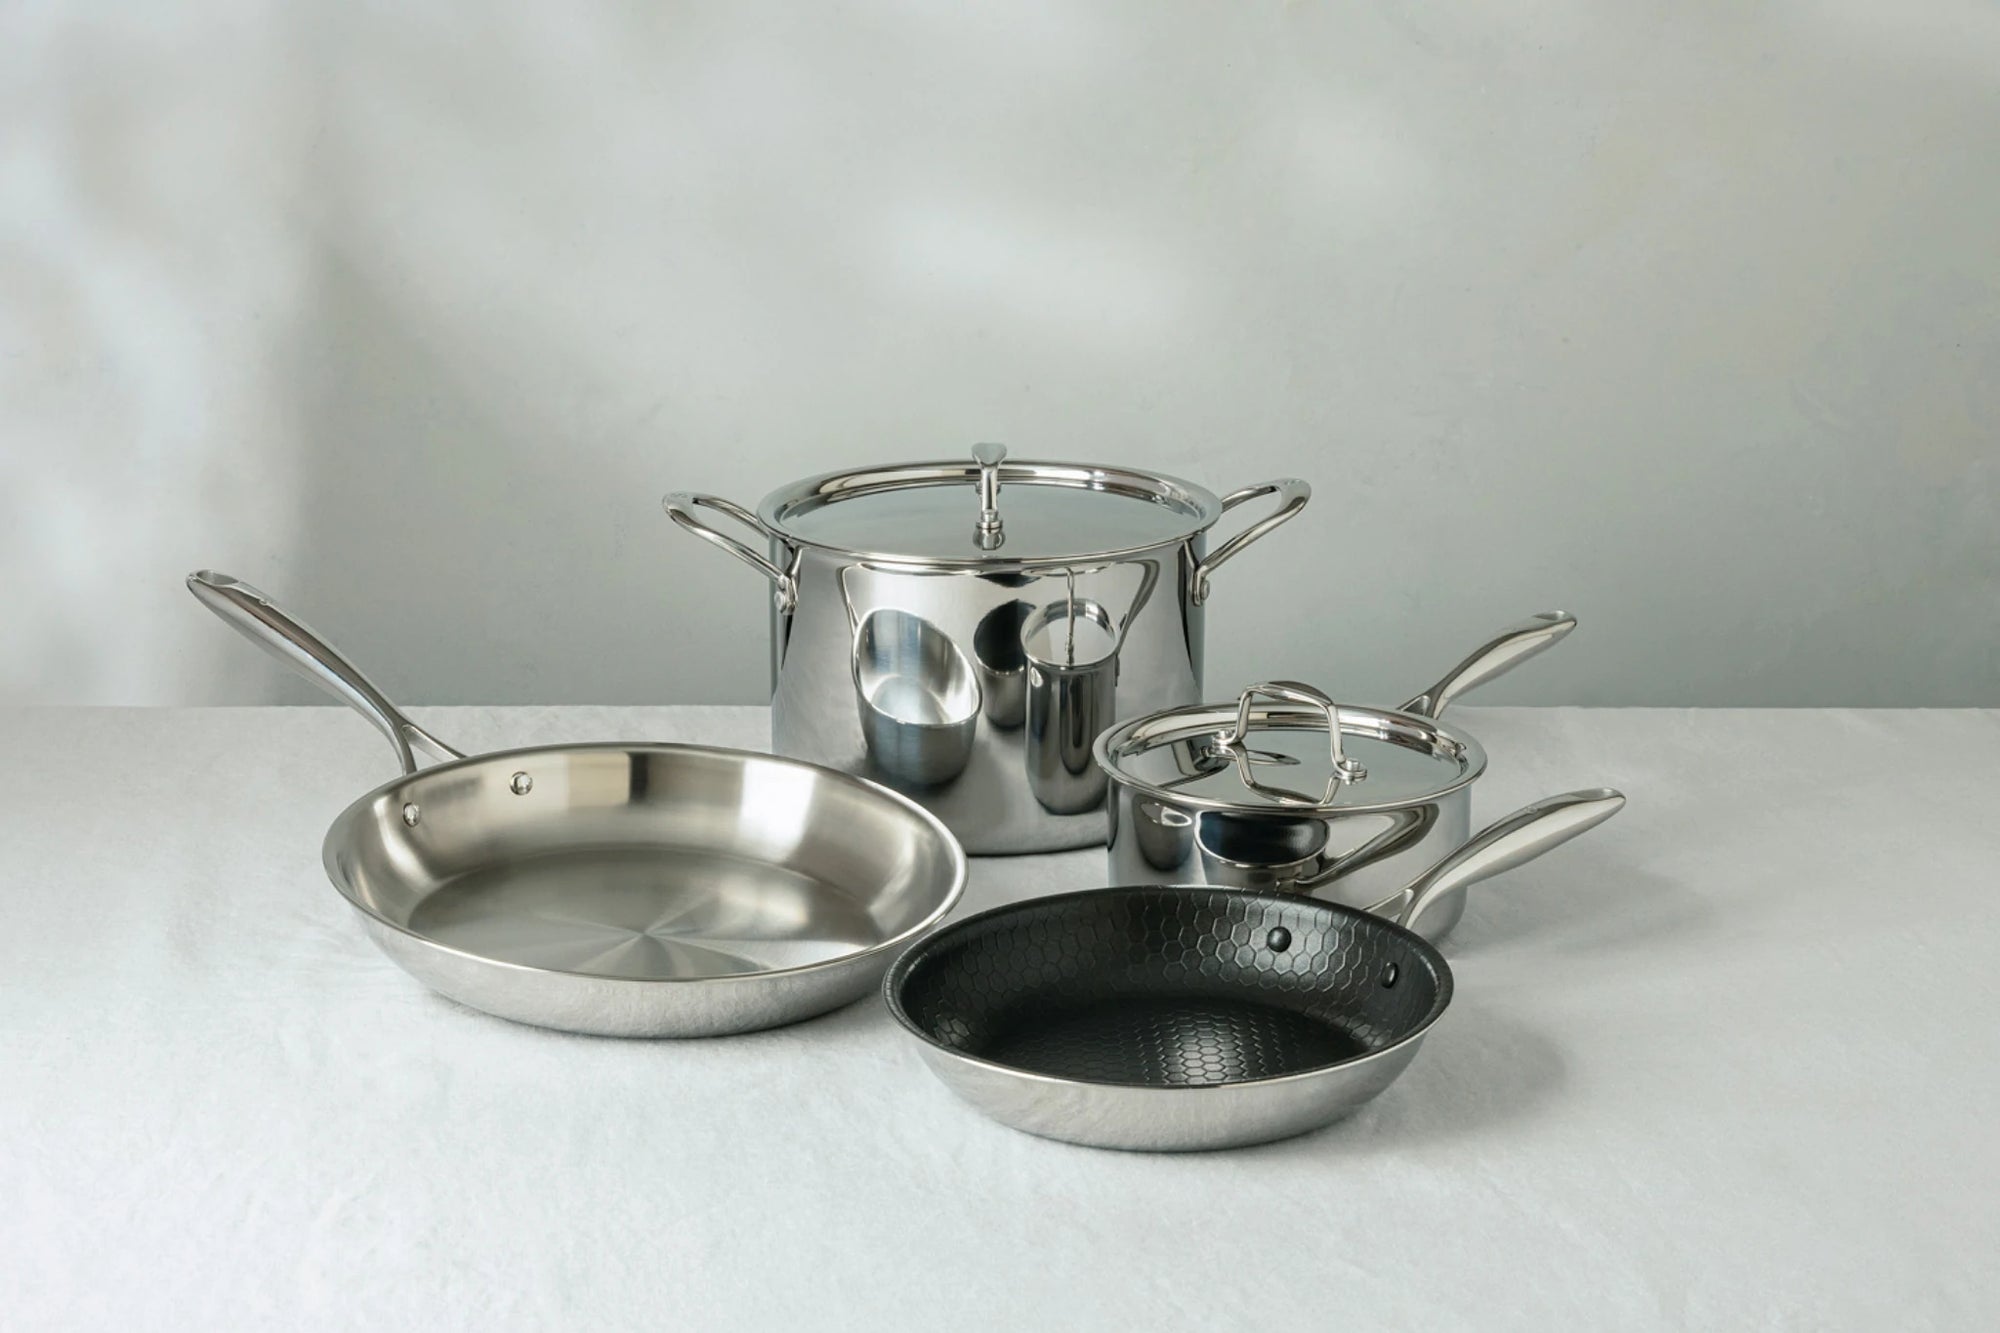 Sardel Small 6-Piece Cookware Set